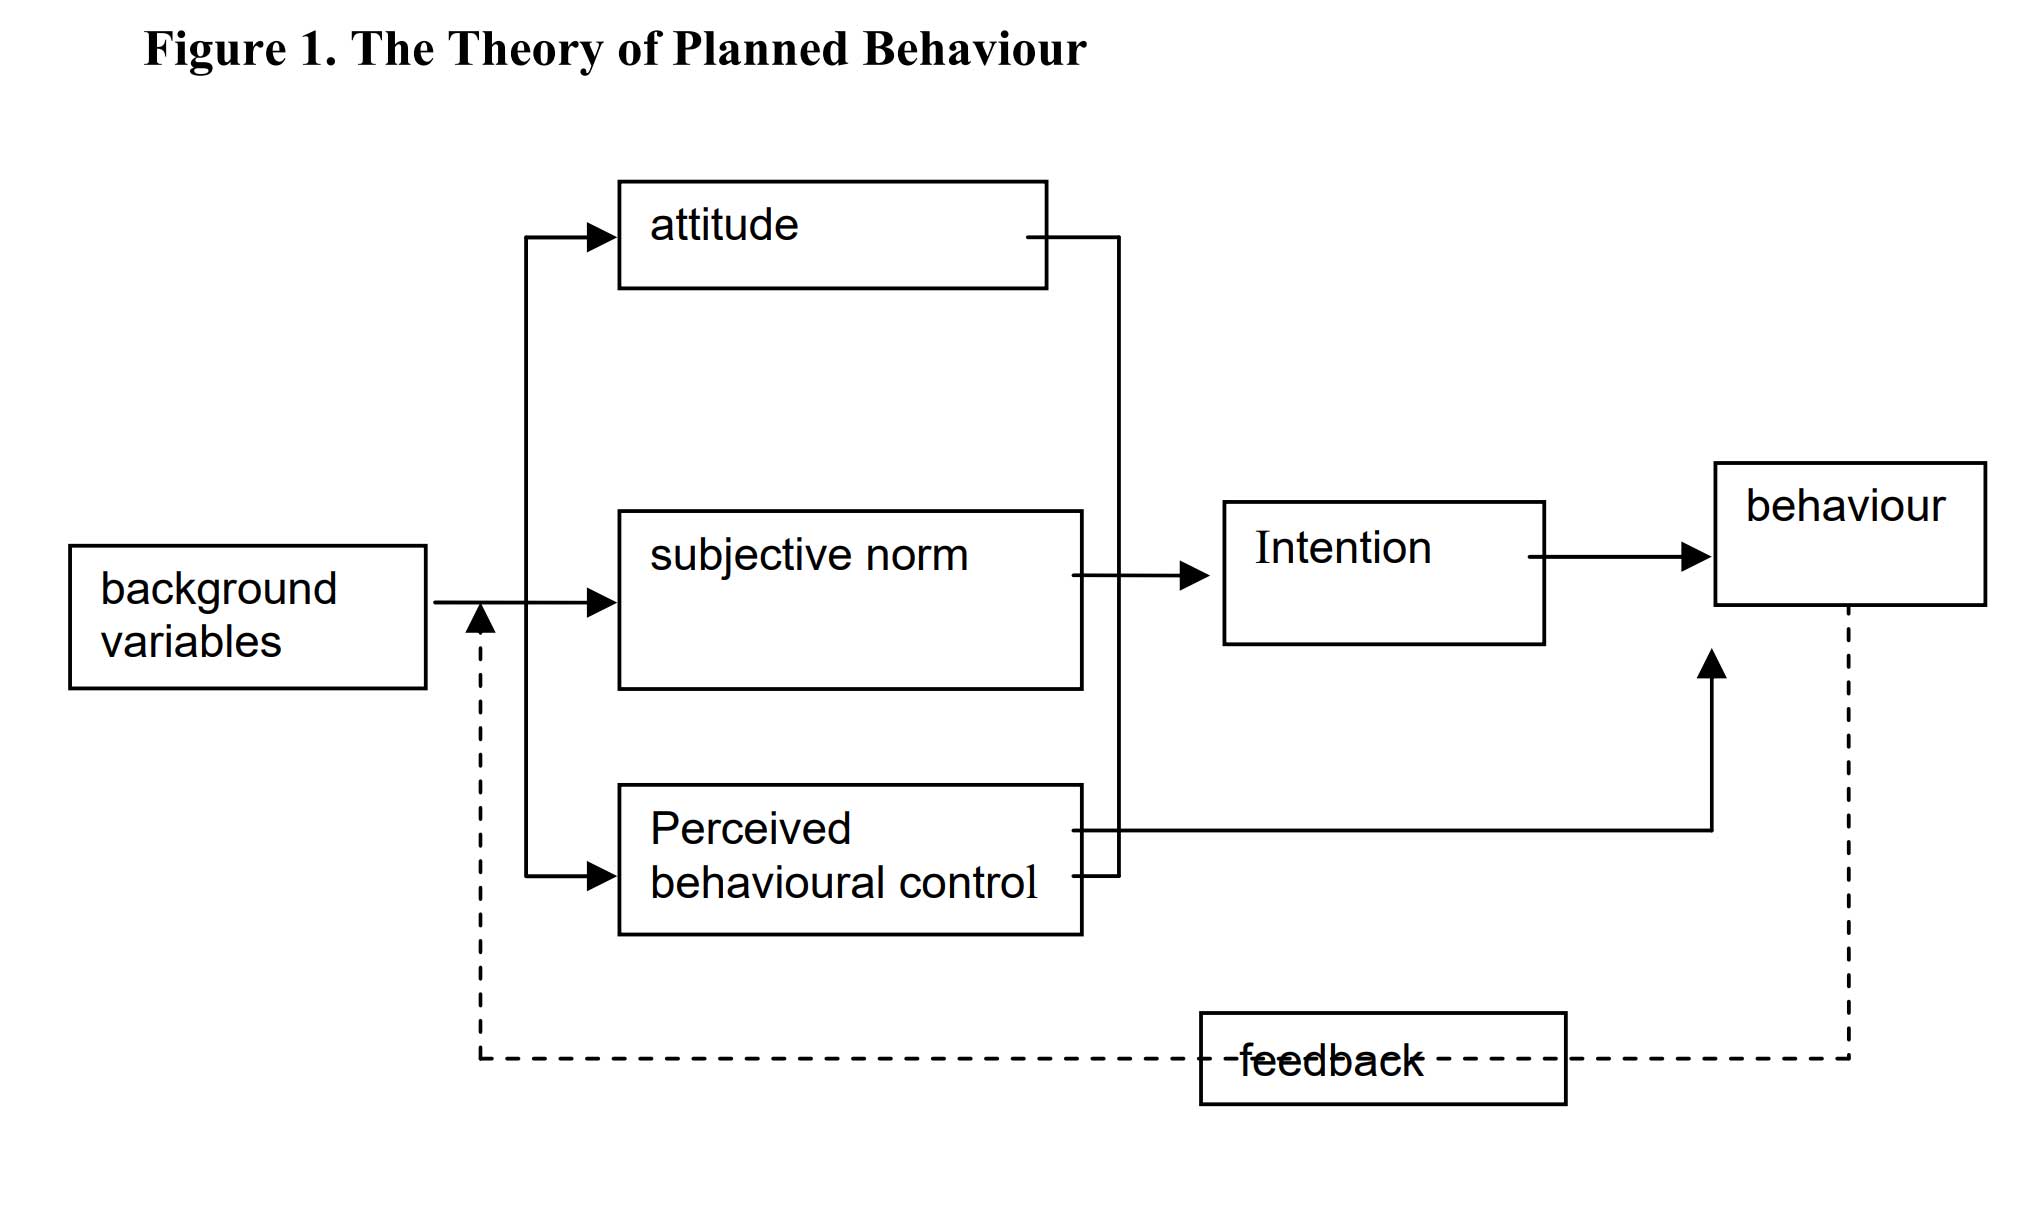 According to the model attitudes, subjective norms and perceived behavioral control
 					predict the intention, which in turn predicts the behavior.